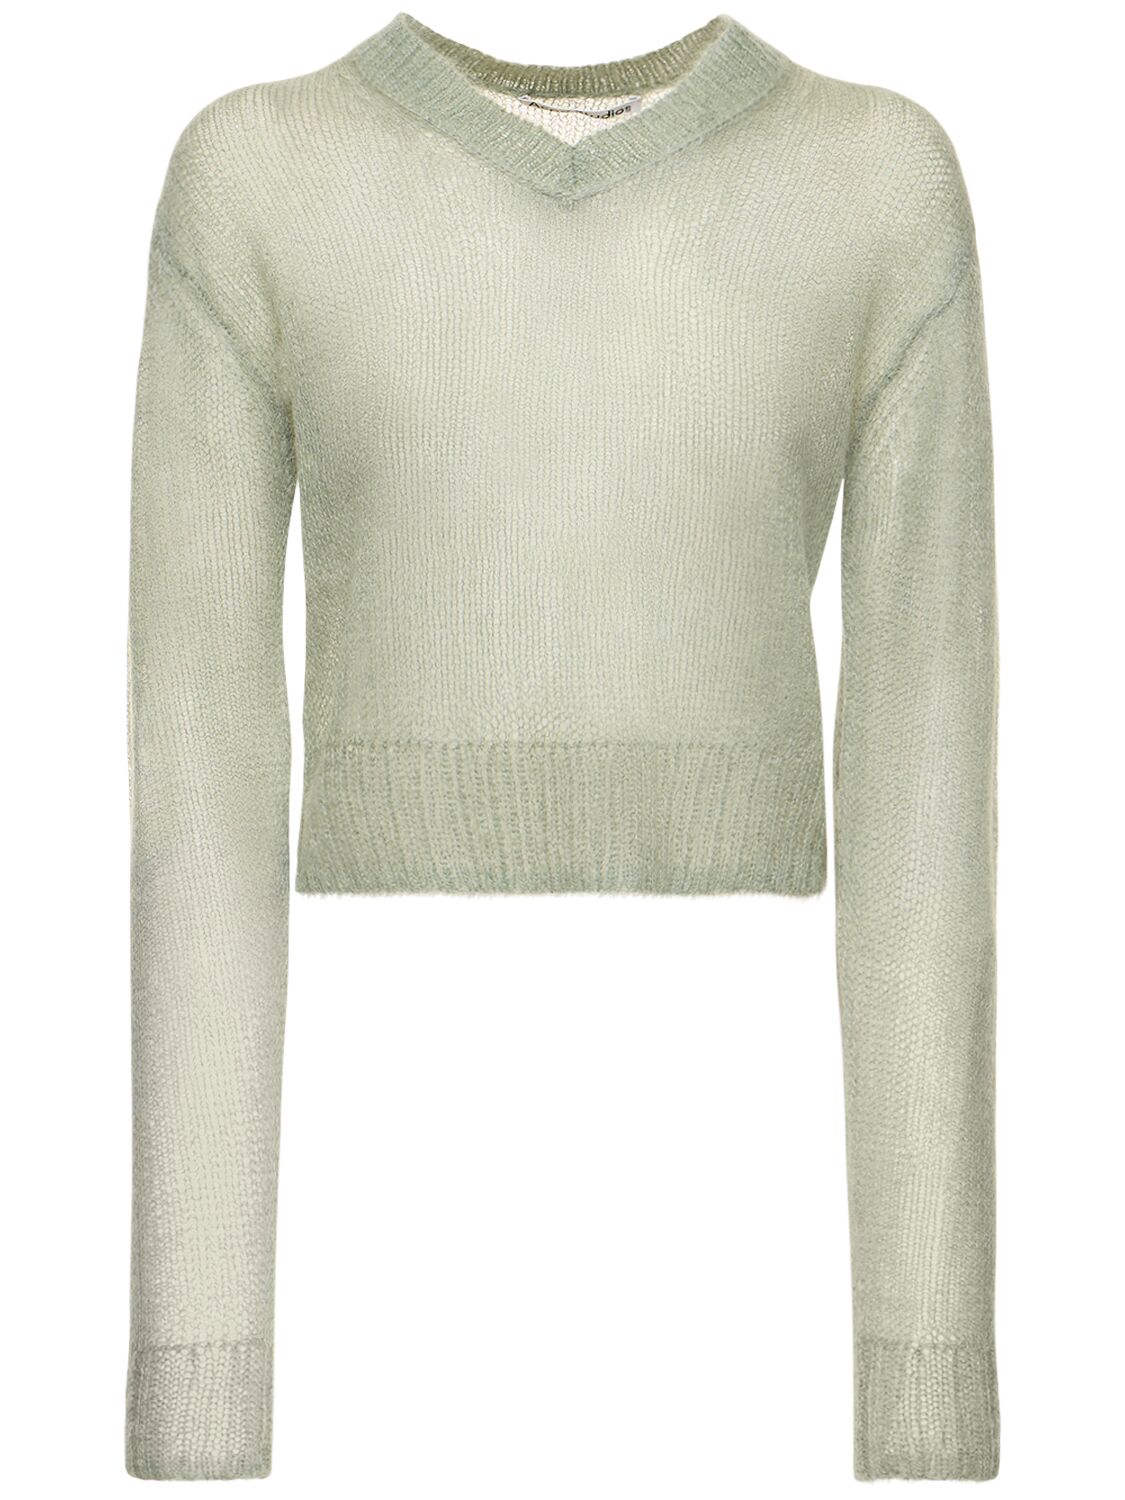 ACNE STUDIOS CROPPED MOHAIR BLEND OPEN KNIT SWEATER